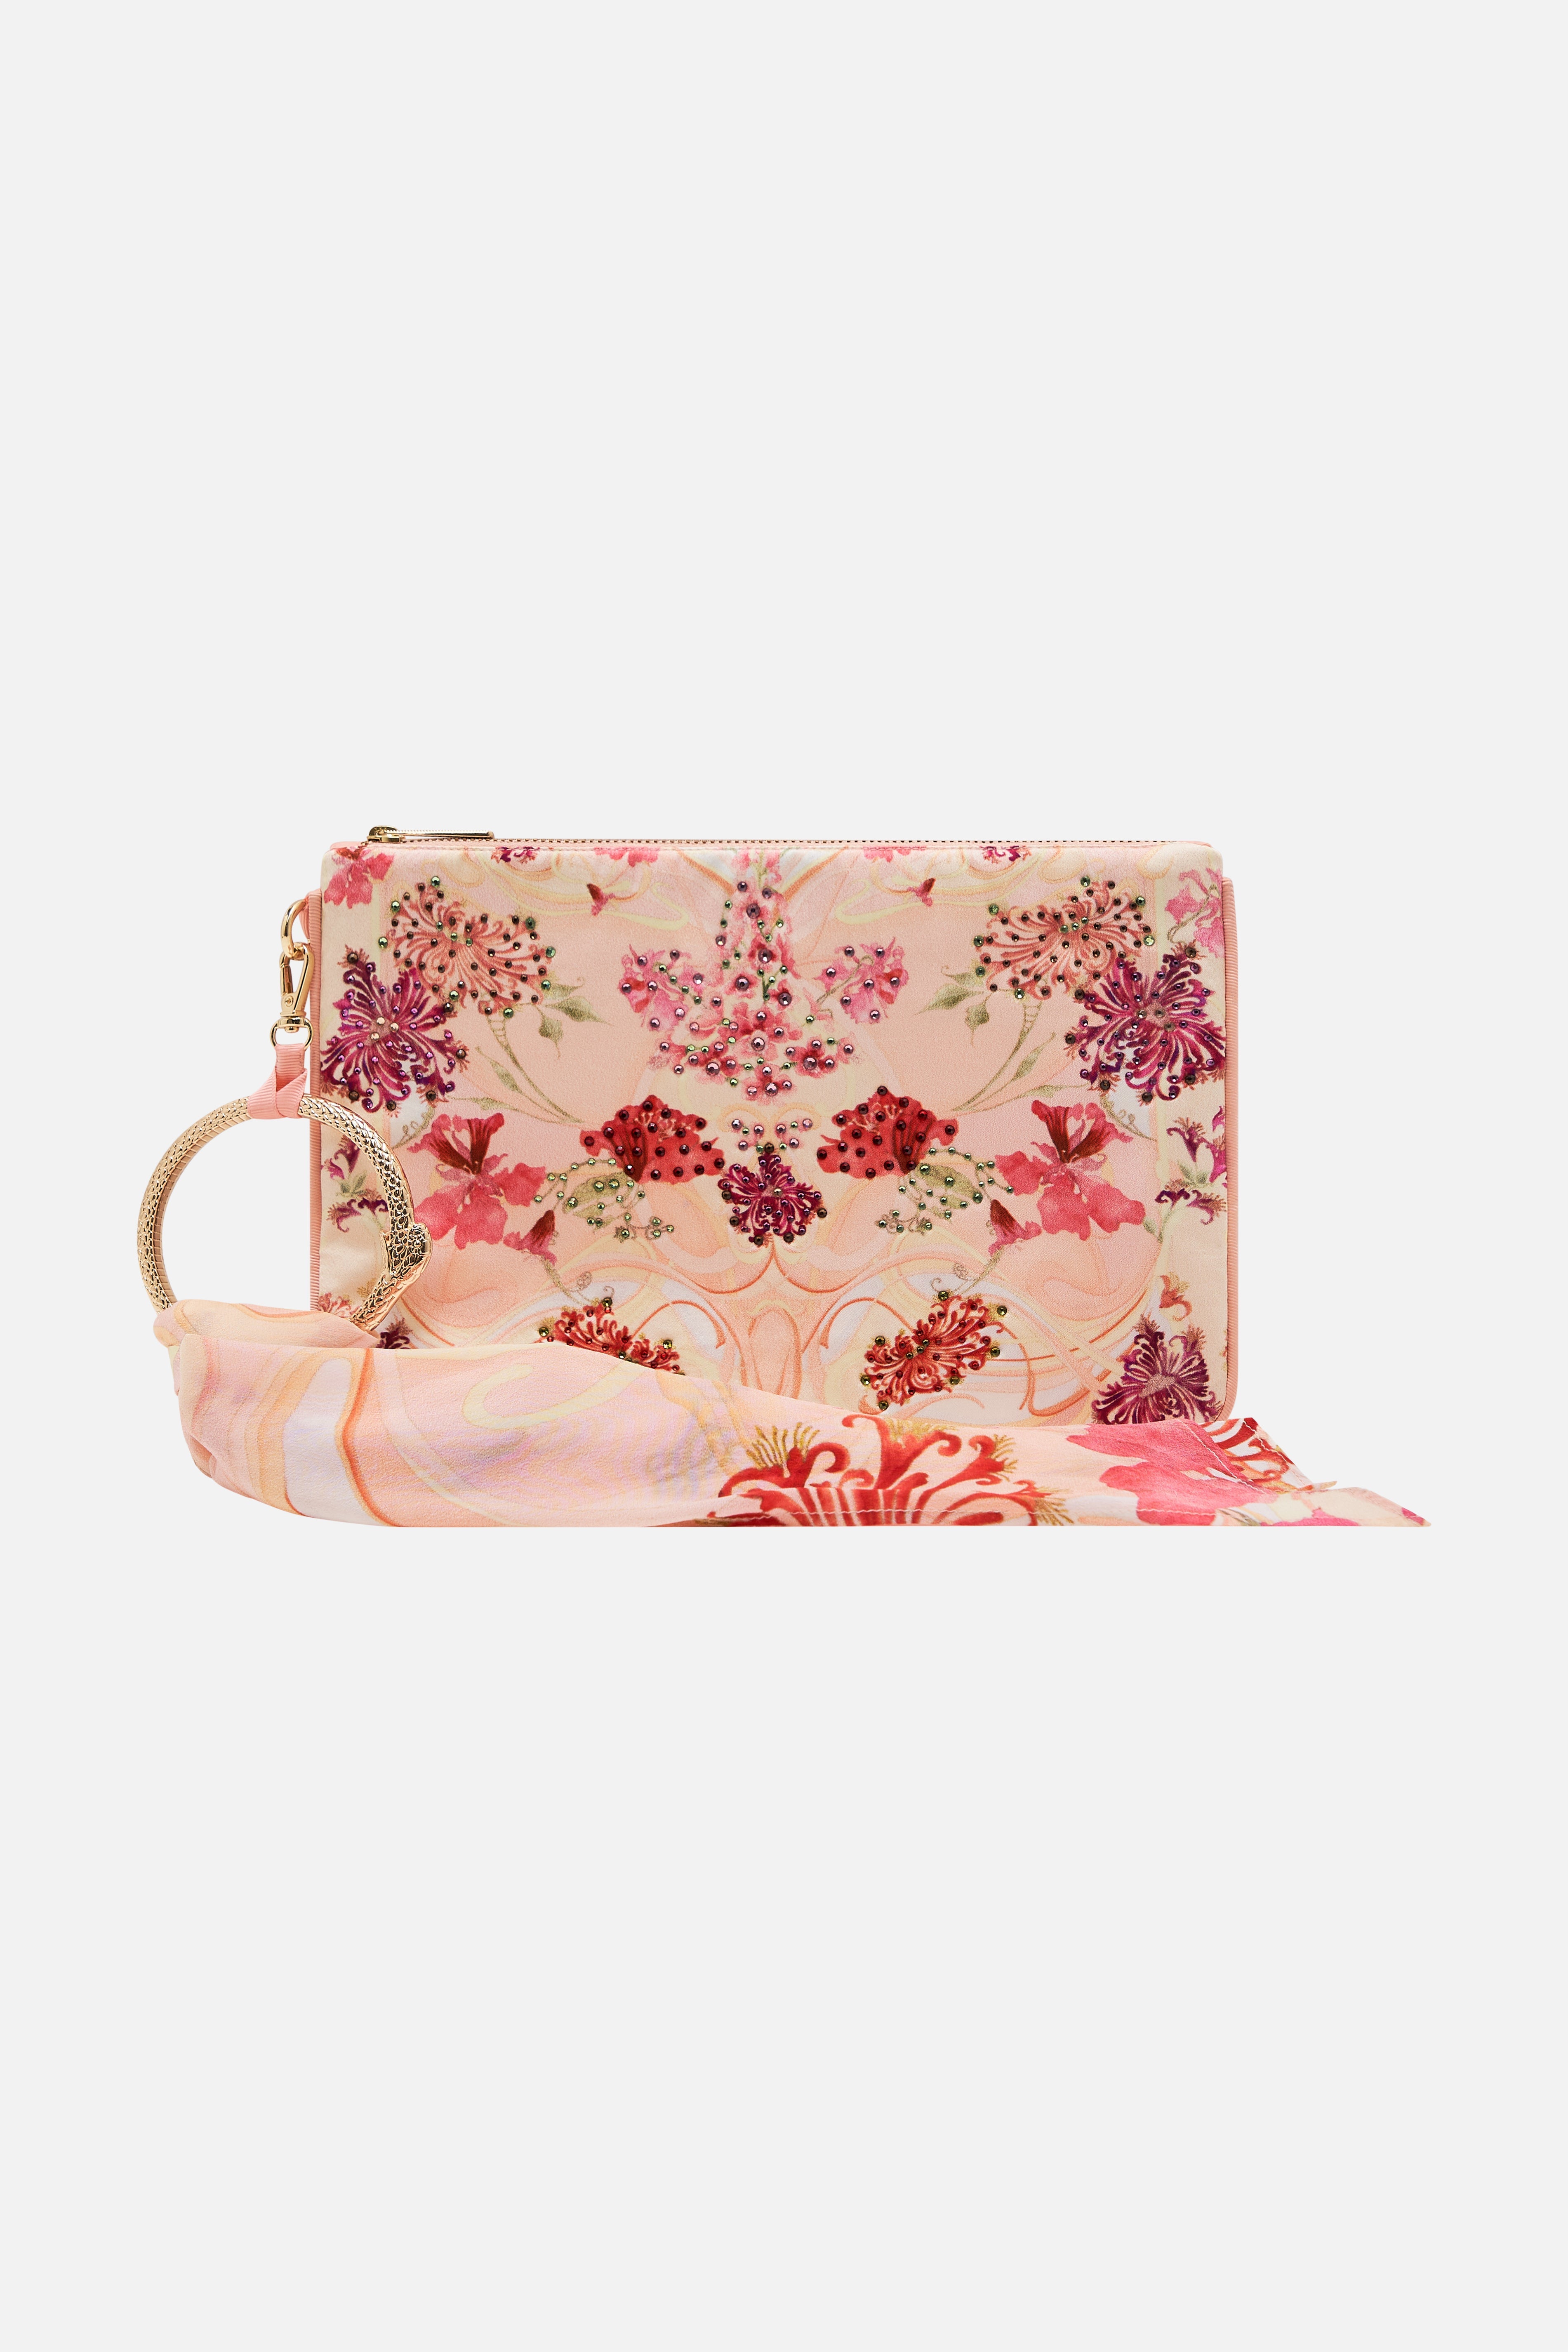 RING SCARF CLUTCH BLOSSOMS AND BRUSHSTROKES